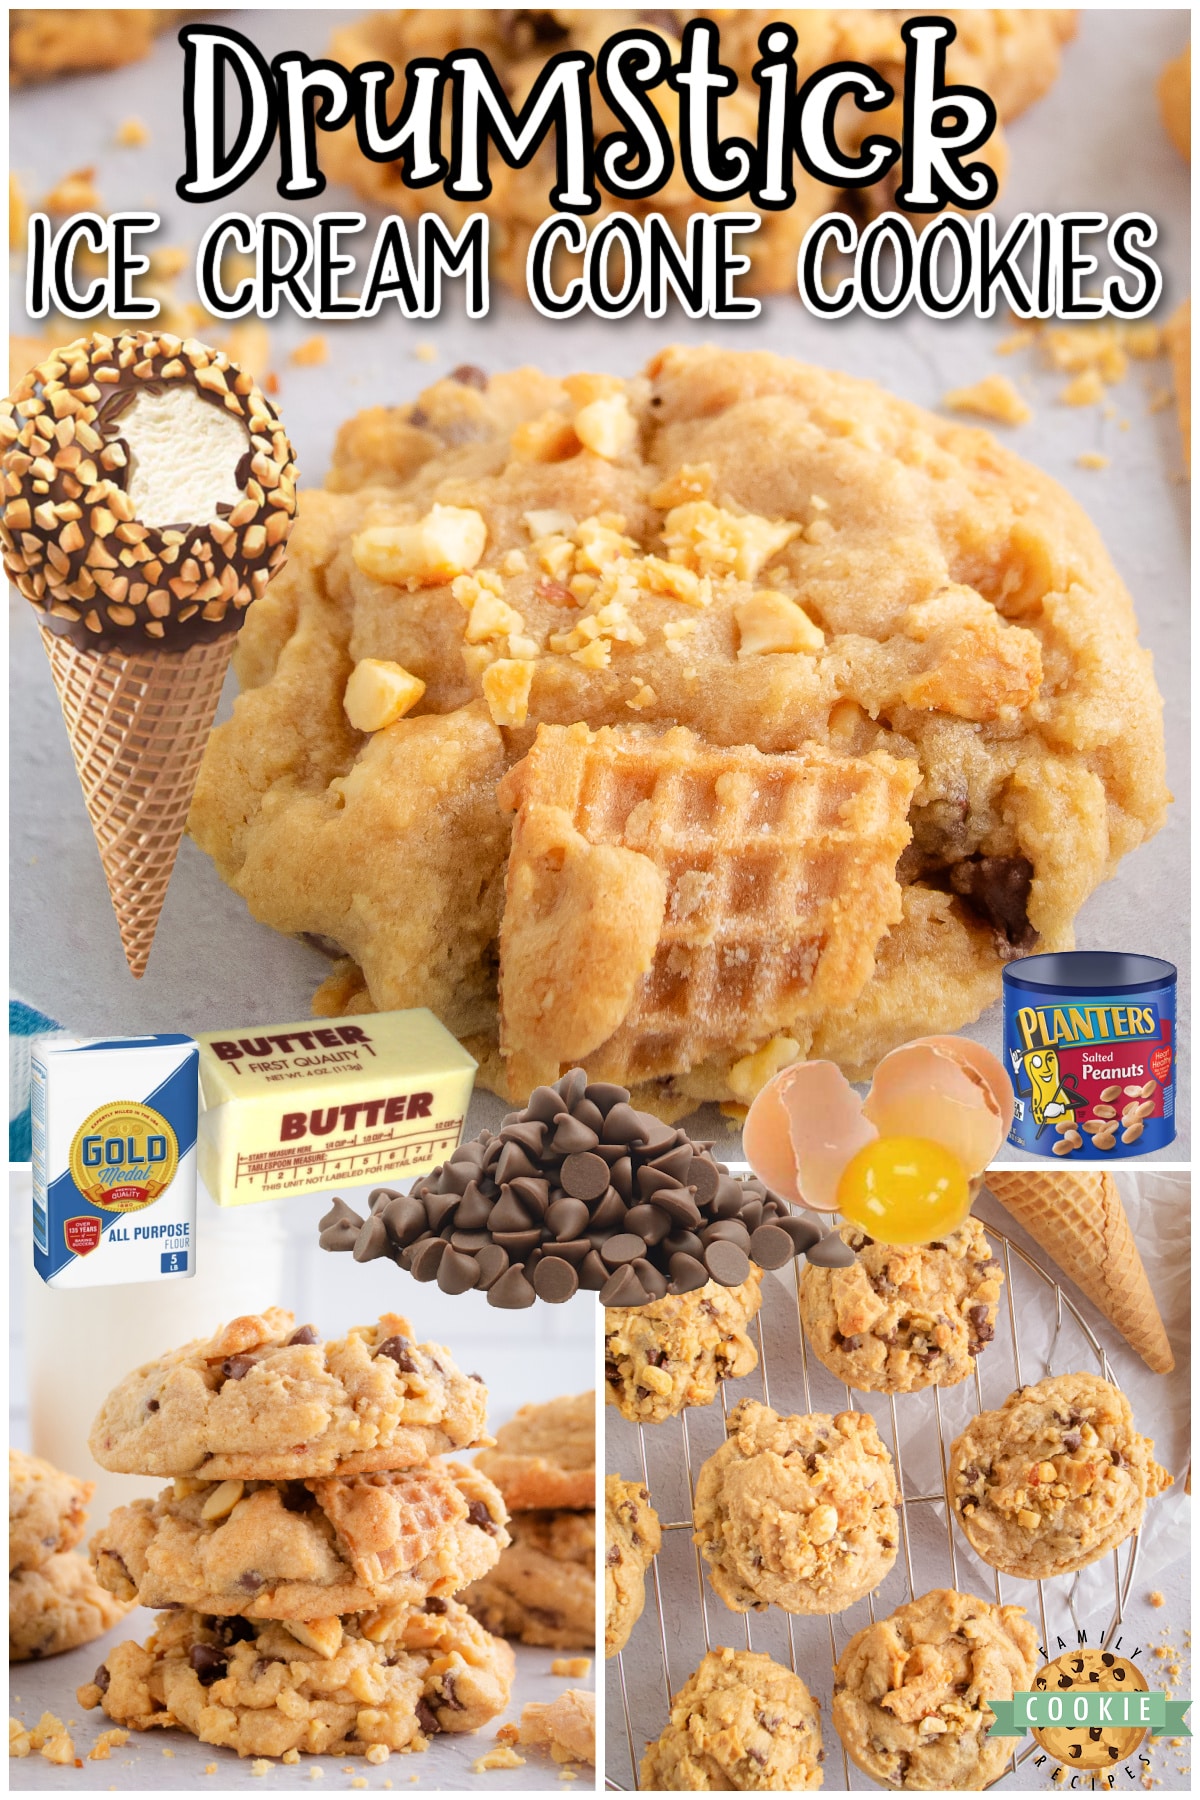 Ice Cream Cone Cookies made with waffle cones & chocolate chips! Fun cookies made with classic drumstick ice cream cones in mind!